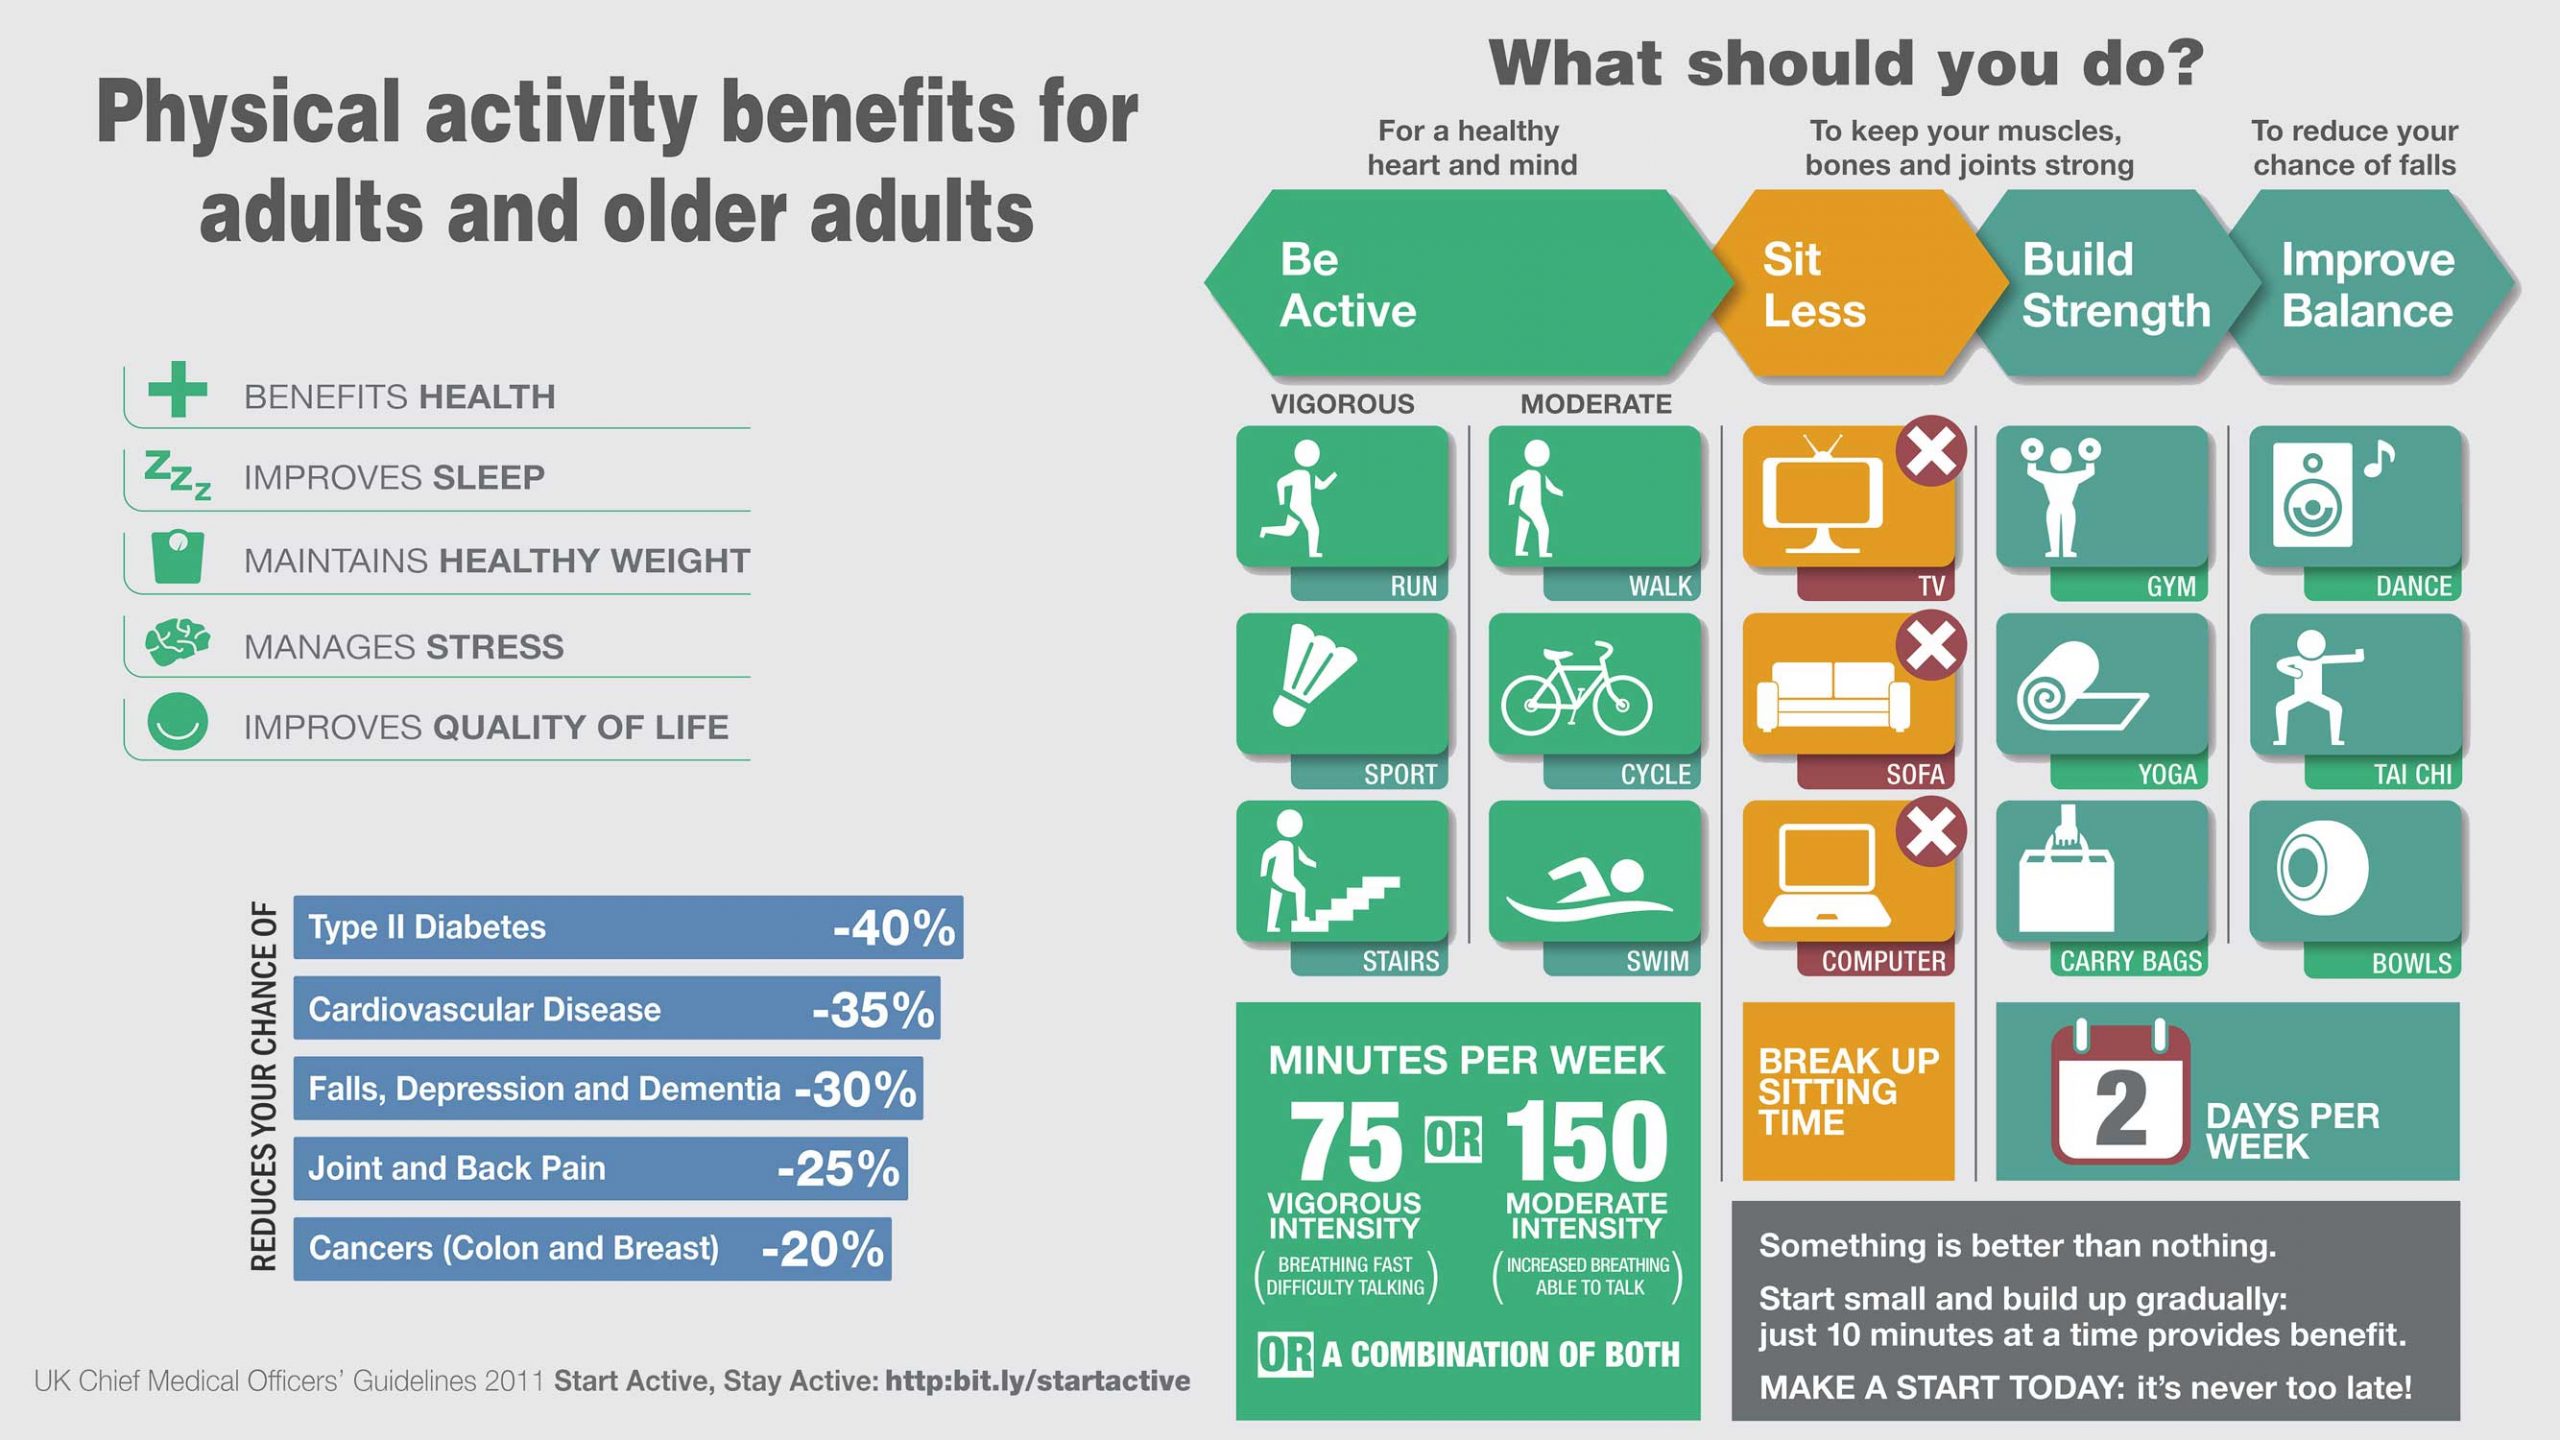 PhysicalBenefits-Adults-Older